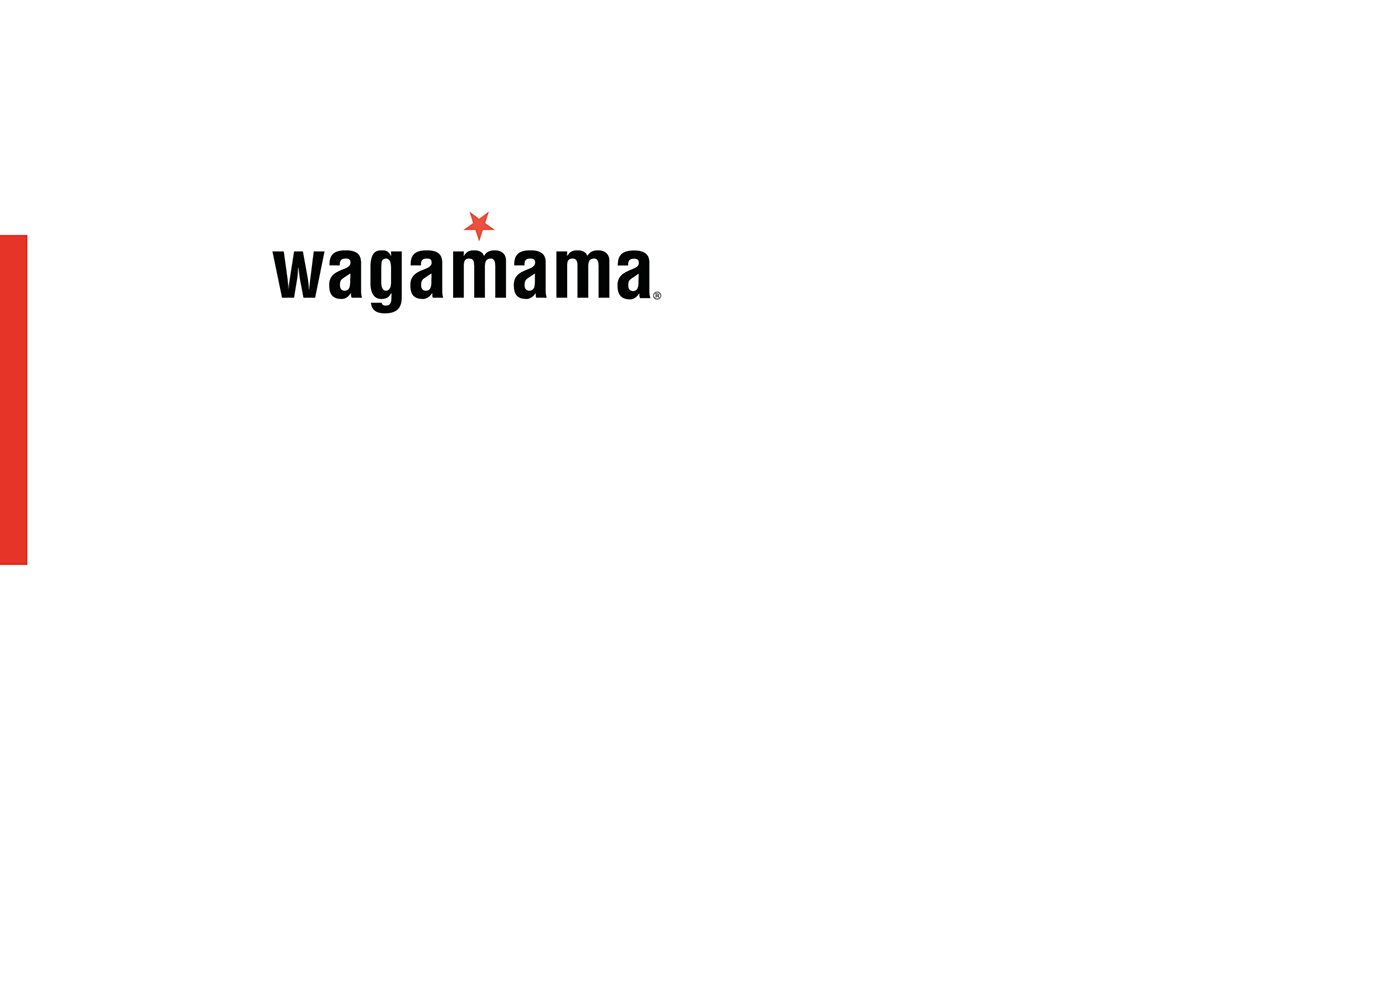 wagamama brand Client mock up poster Urban personality Diversity live project products Website social media campaign youtube vlogging